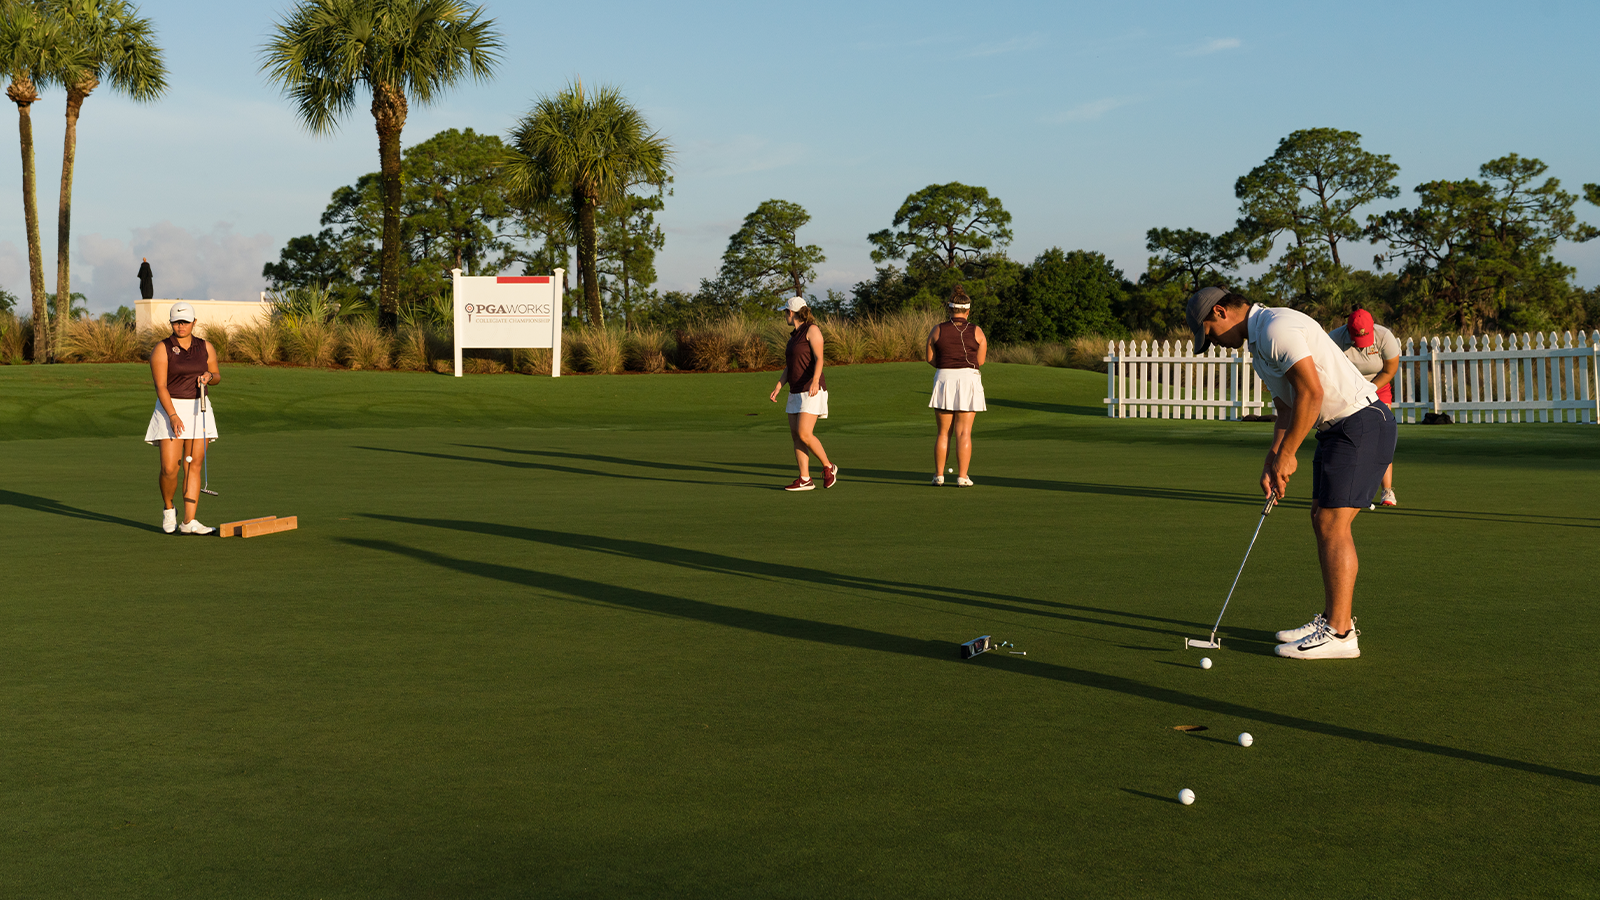 Players putting at the practice green during the first round of the 33rd PGA WORKS Collegiate Championship held at The PGA Golf Club at PGA Village on May 10, 2019 in Port St. Lucie, Florida. (Photo by Darren Carroll/PGA of America)